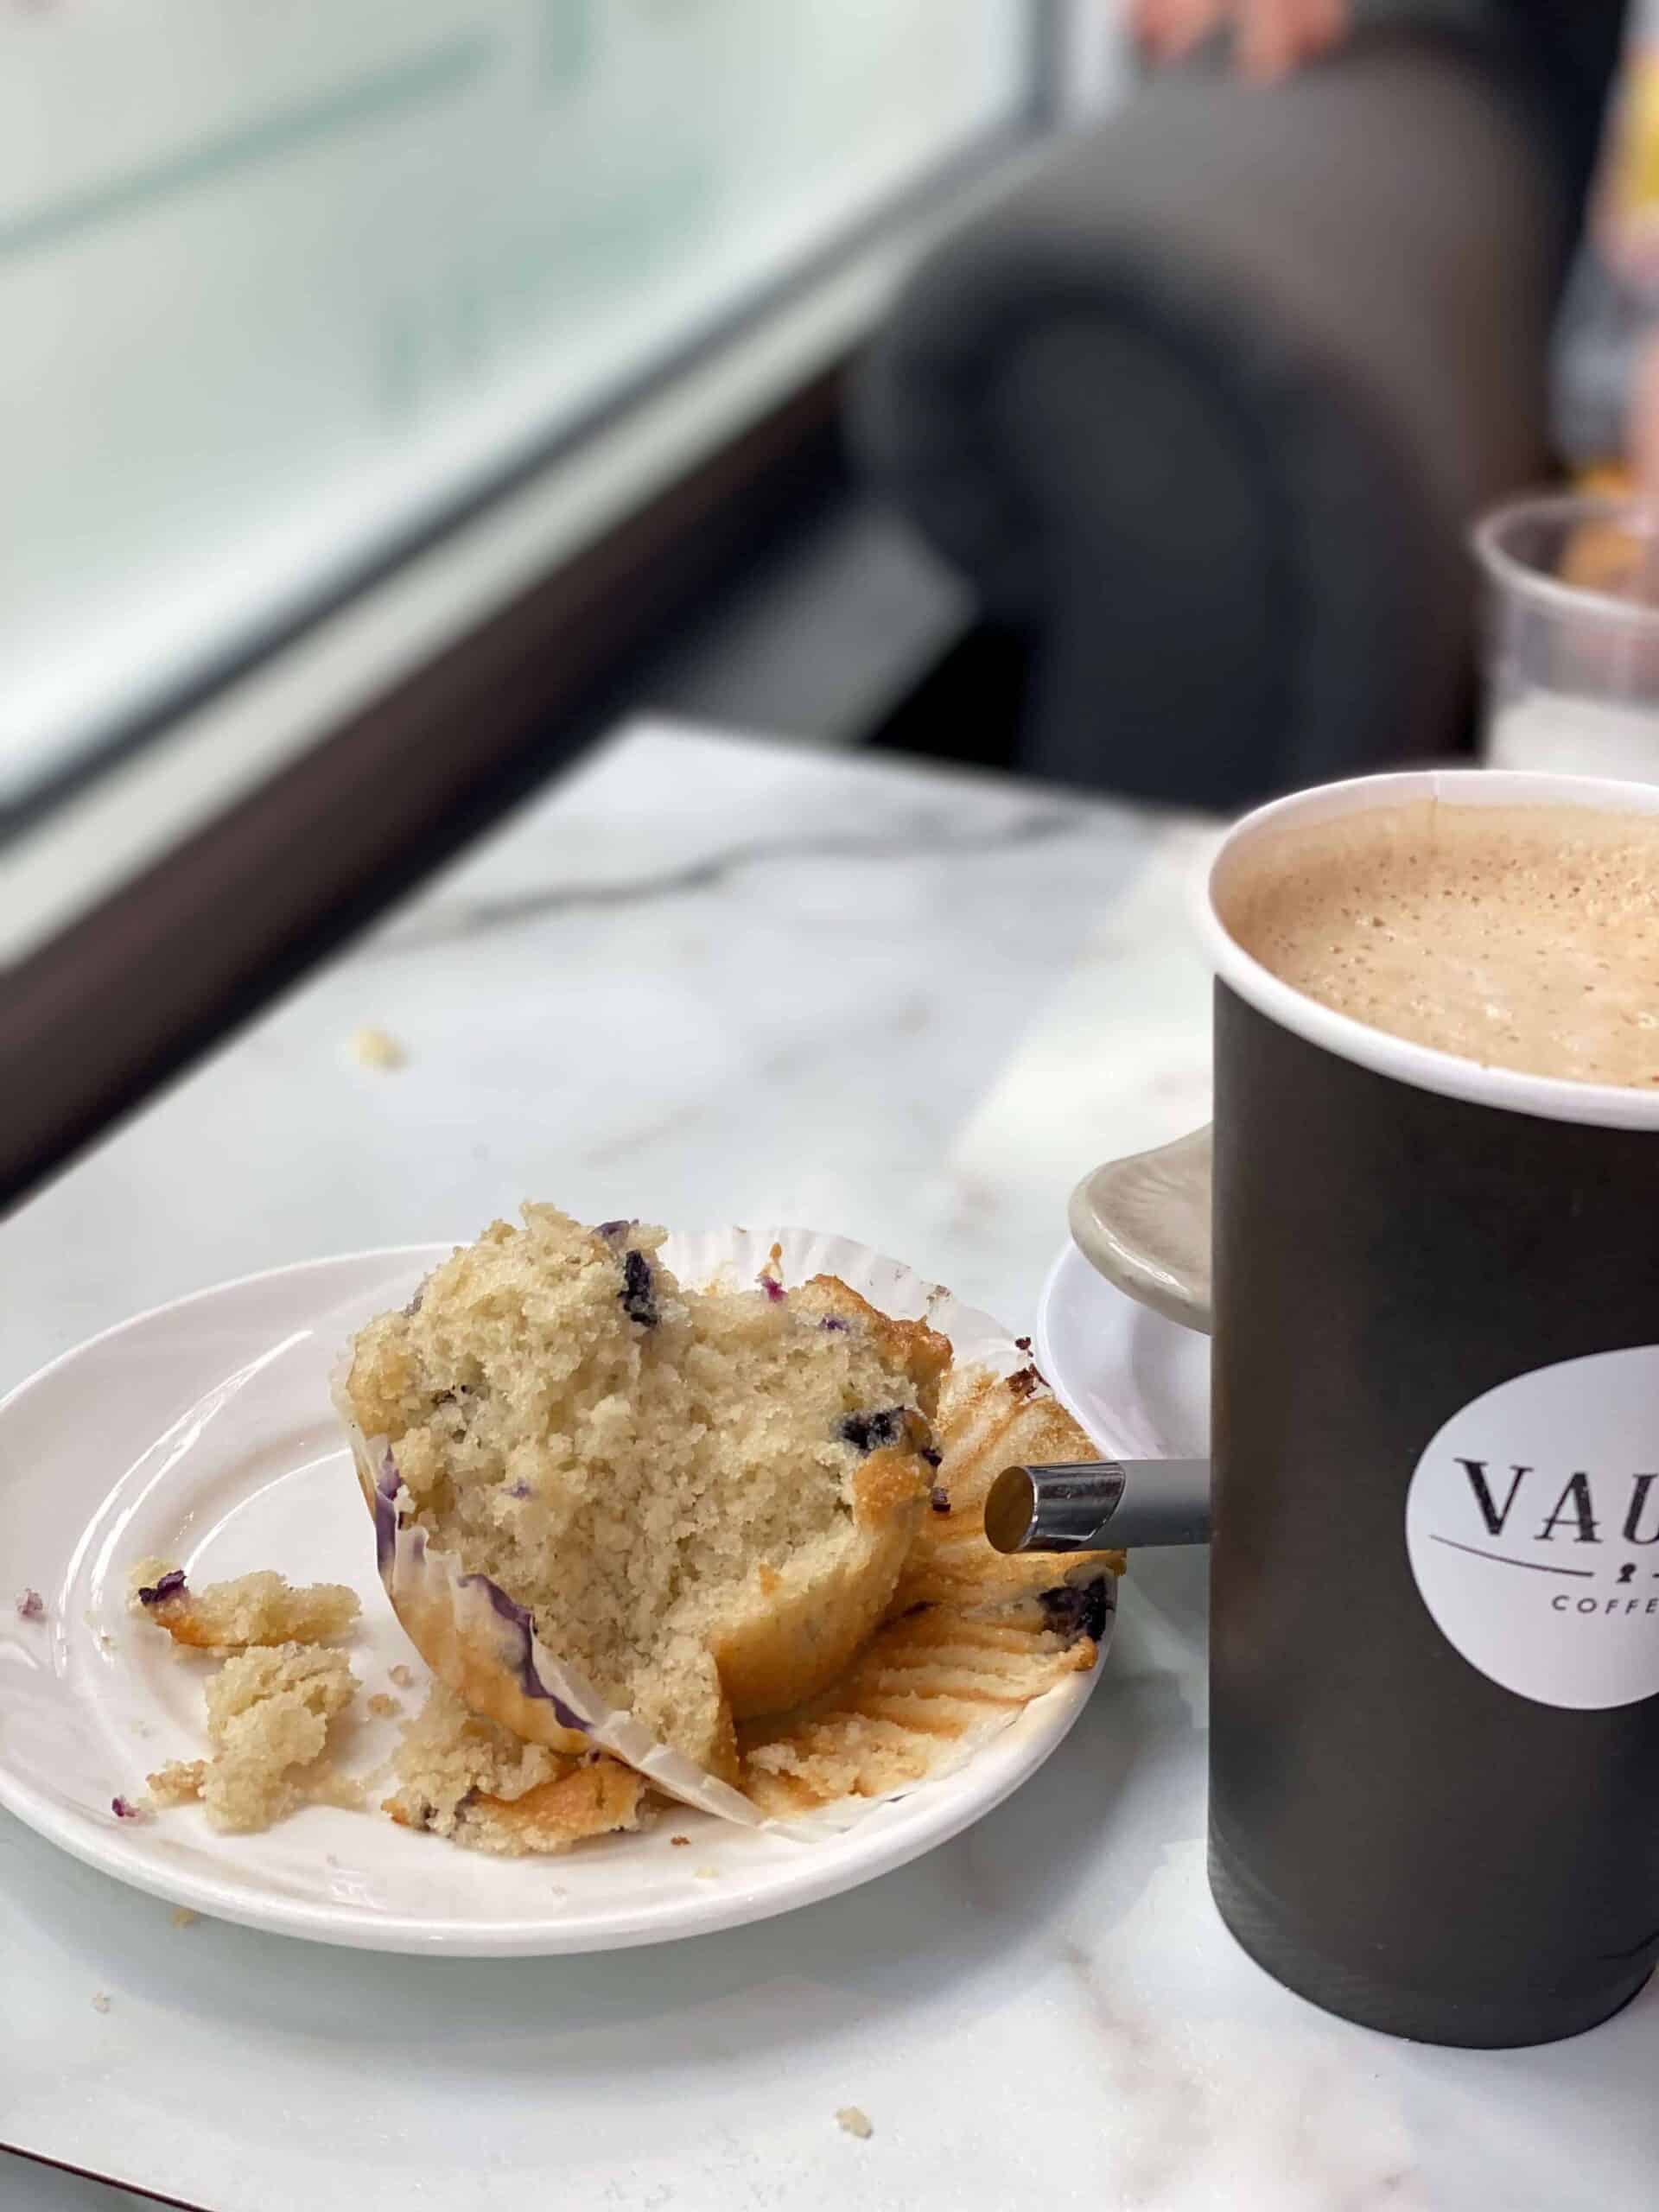 Image of coffee and muffin from Vault Coffee in Coeur d'Alene, Idaho